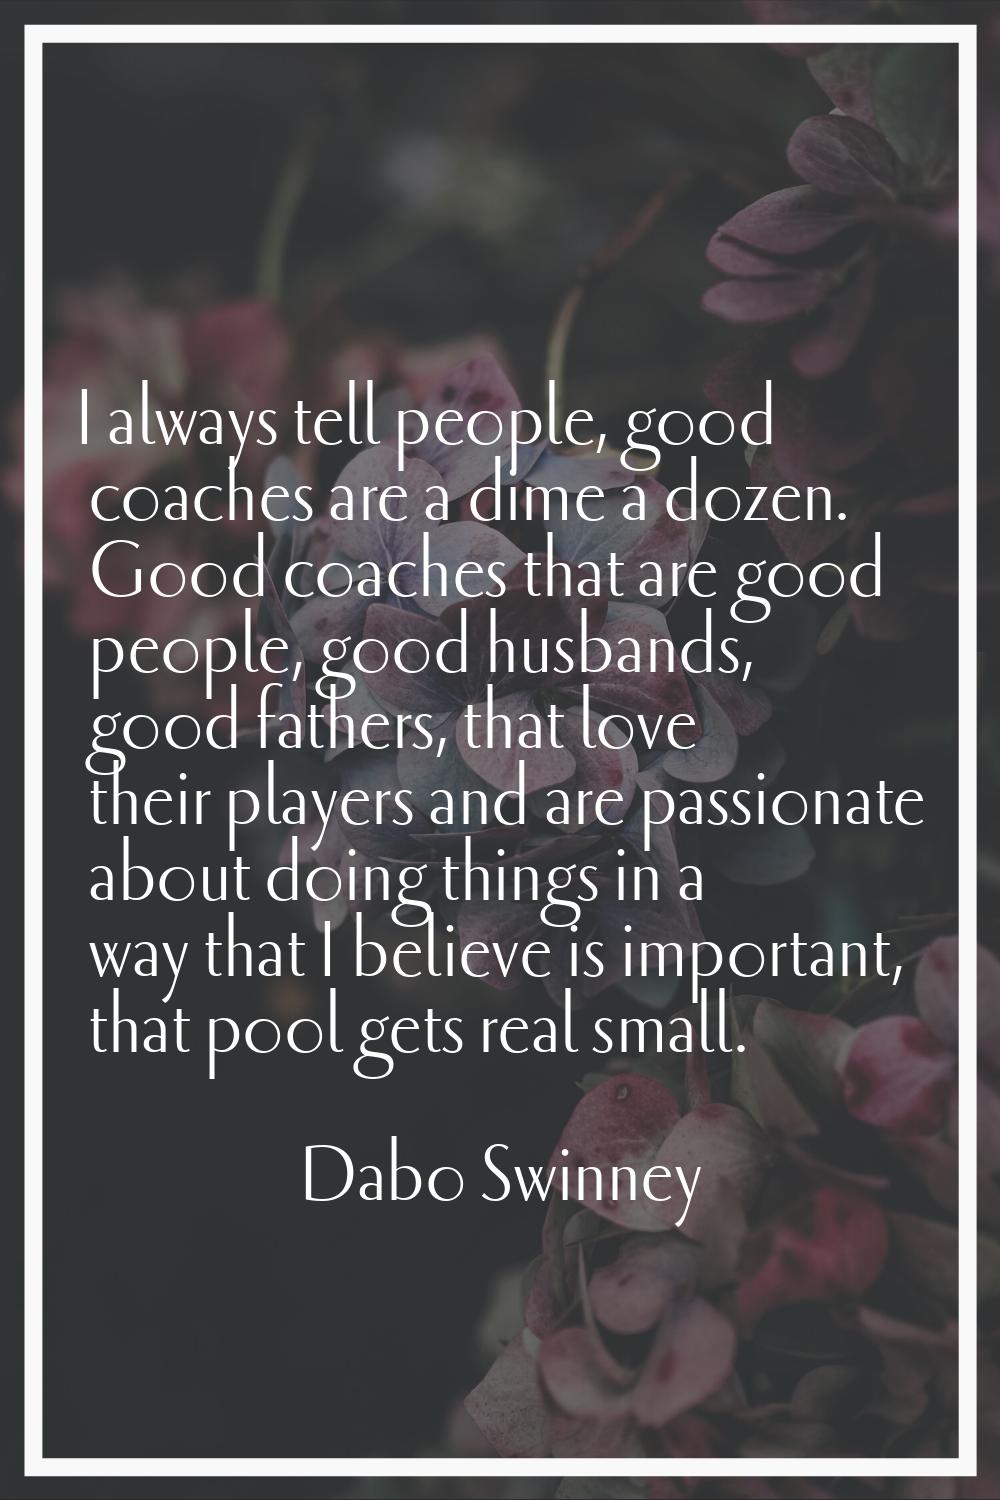 I always tell people, good coaches are a dime a dozen. Good coaches that are good people, good husb